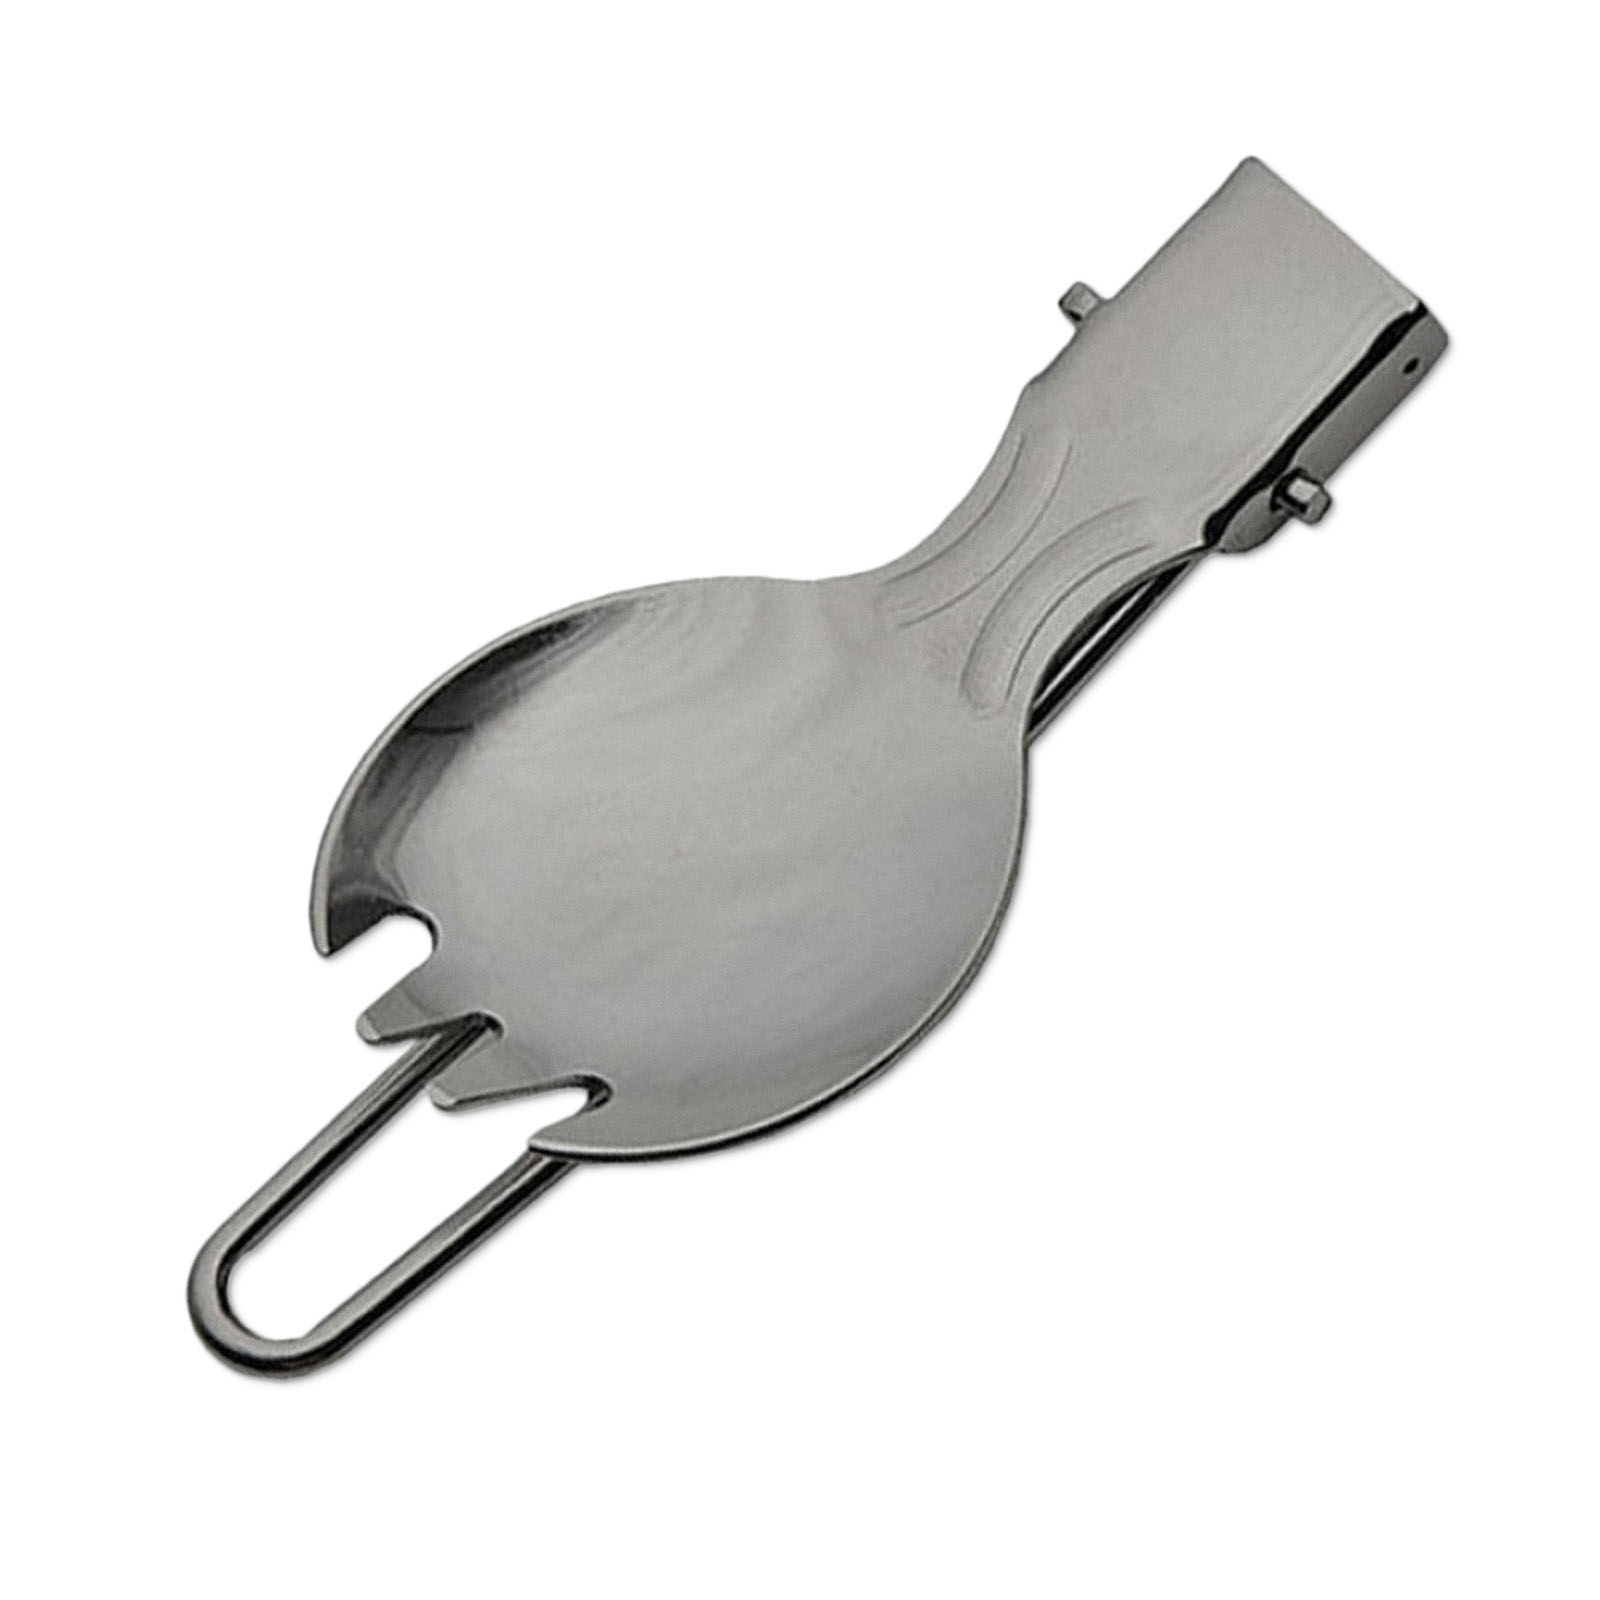 Spork, foldable outdoor spoon with survival fork, perfect for camping